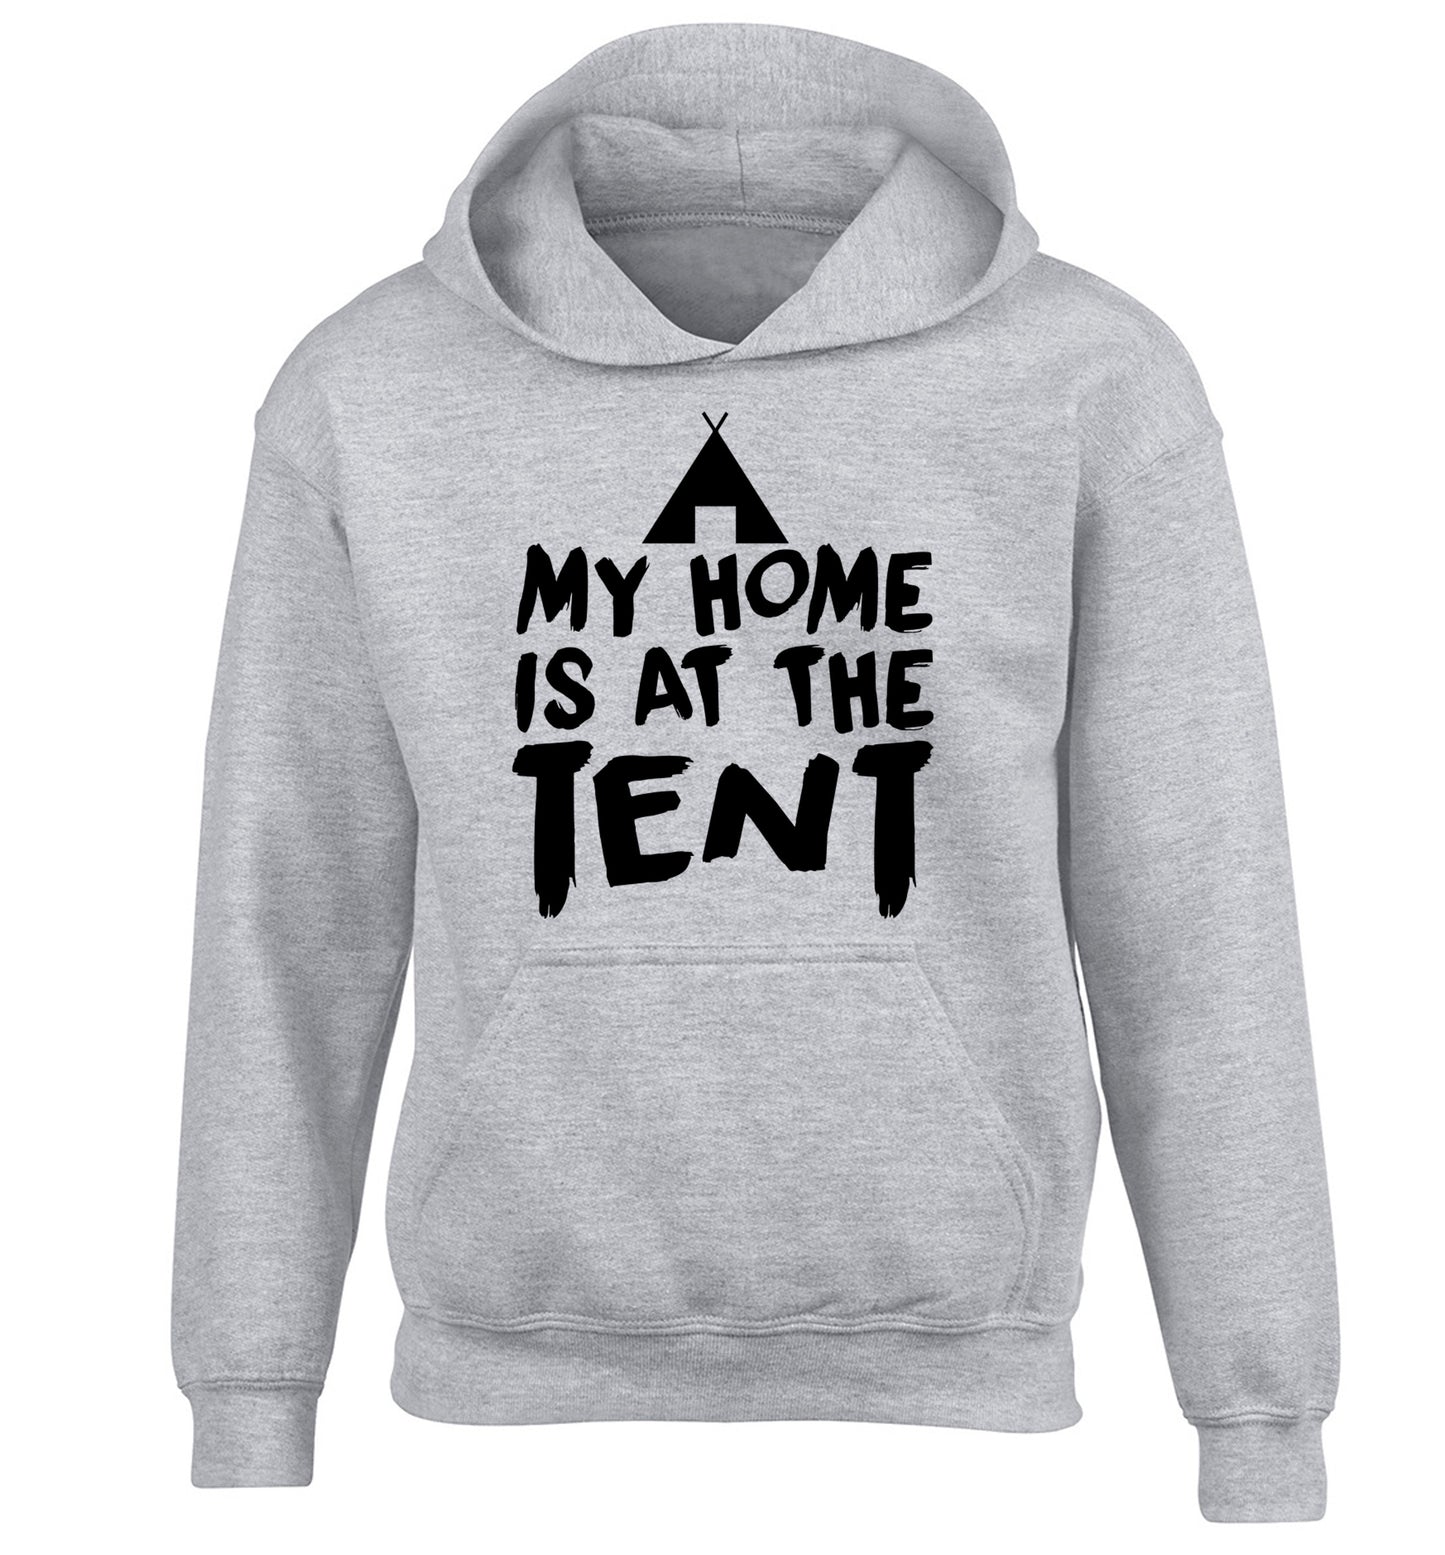 My home is at the tent children's grey hoodie 12-14 Years